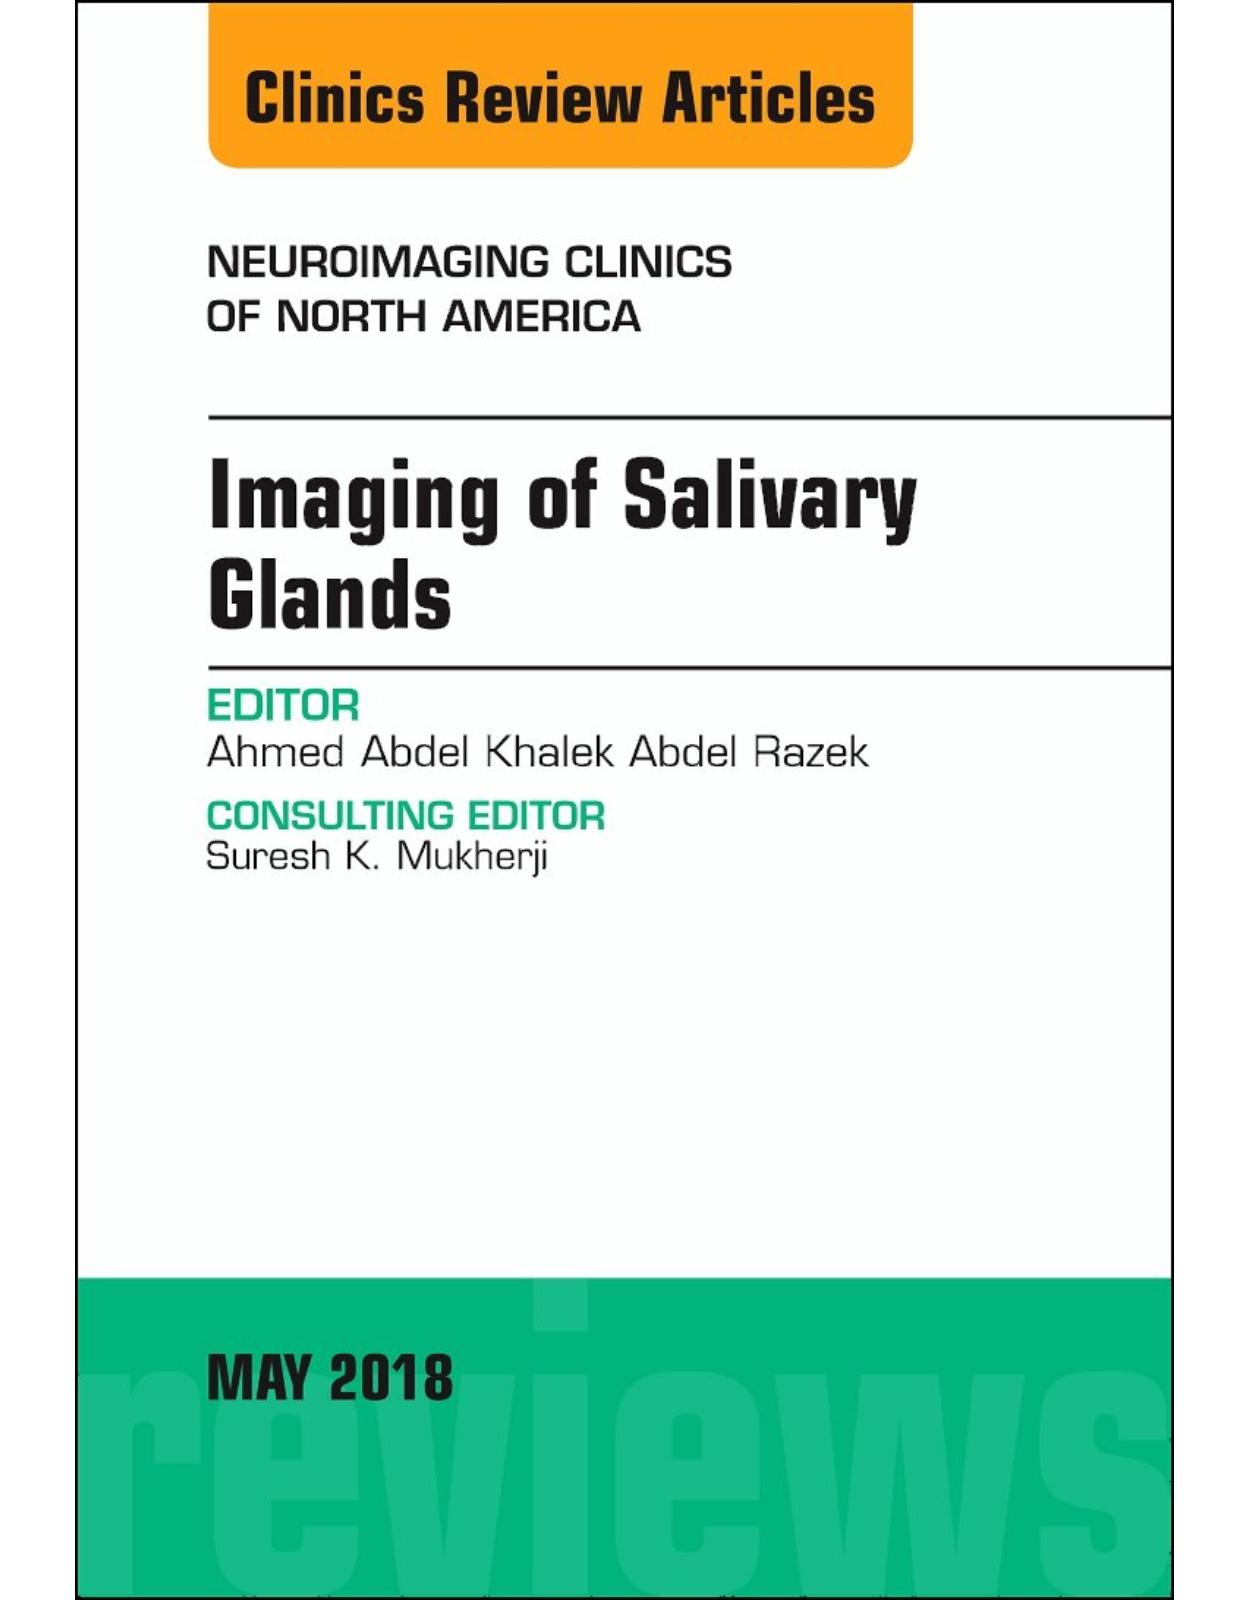 Imaging of Salivary Glands, An Issue of Neuroimaging Clinics of North America, Volume 28-2